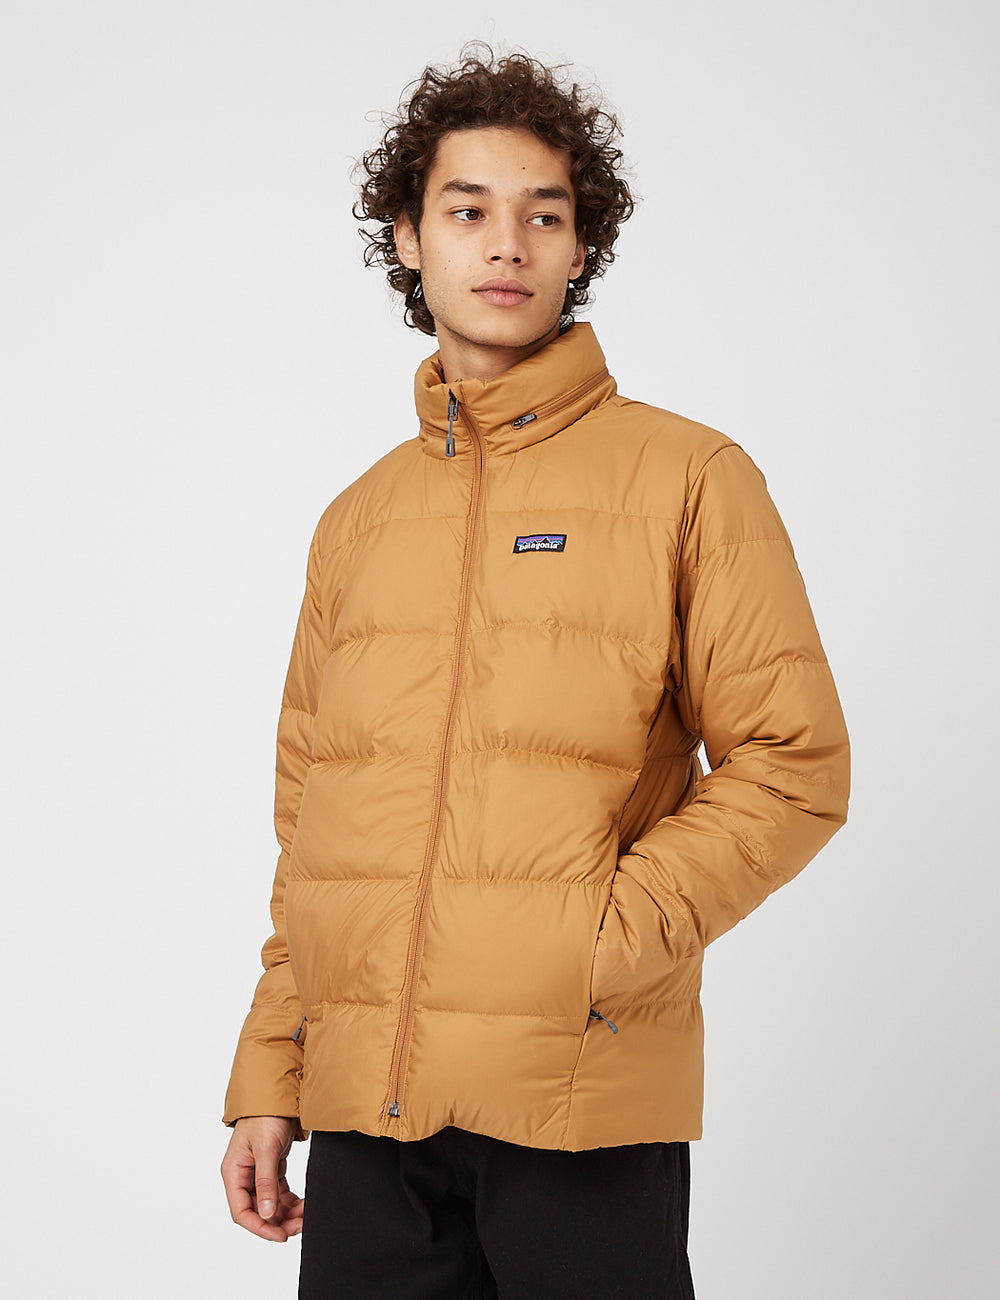 Patagonia Silent Down Jacket - Nest Brown I URBAN EXCESS.